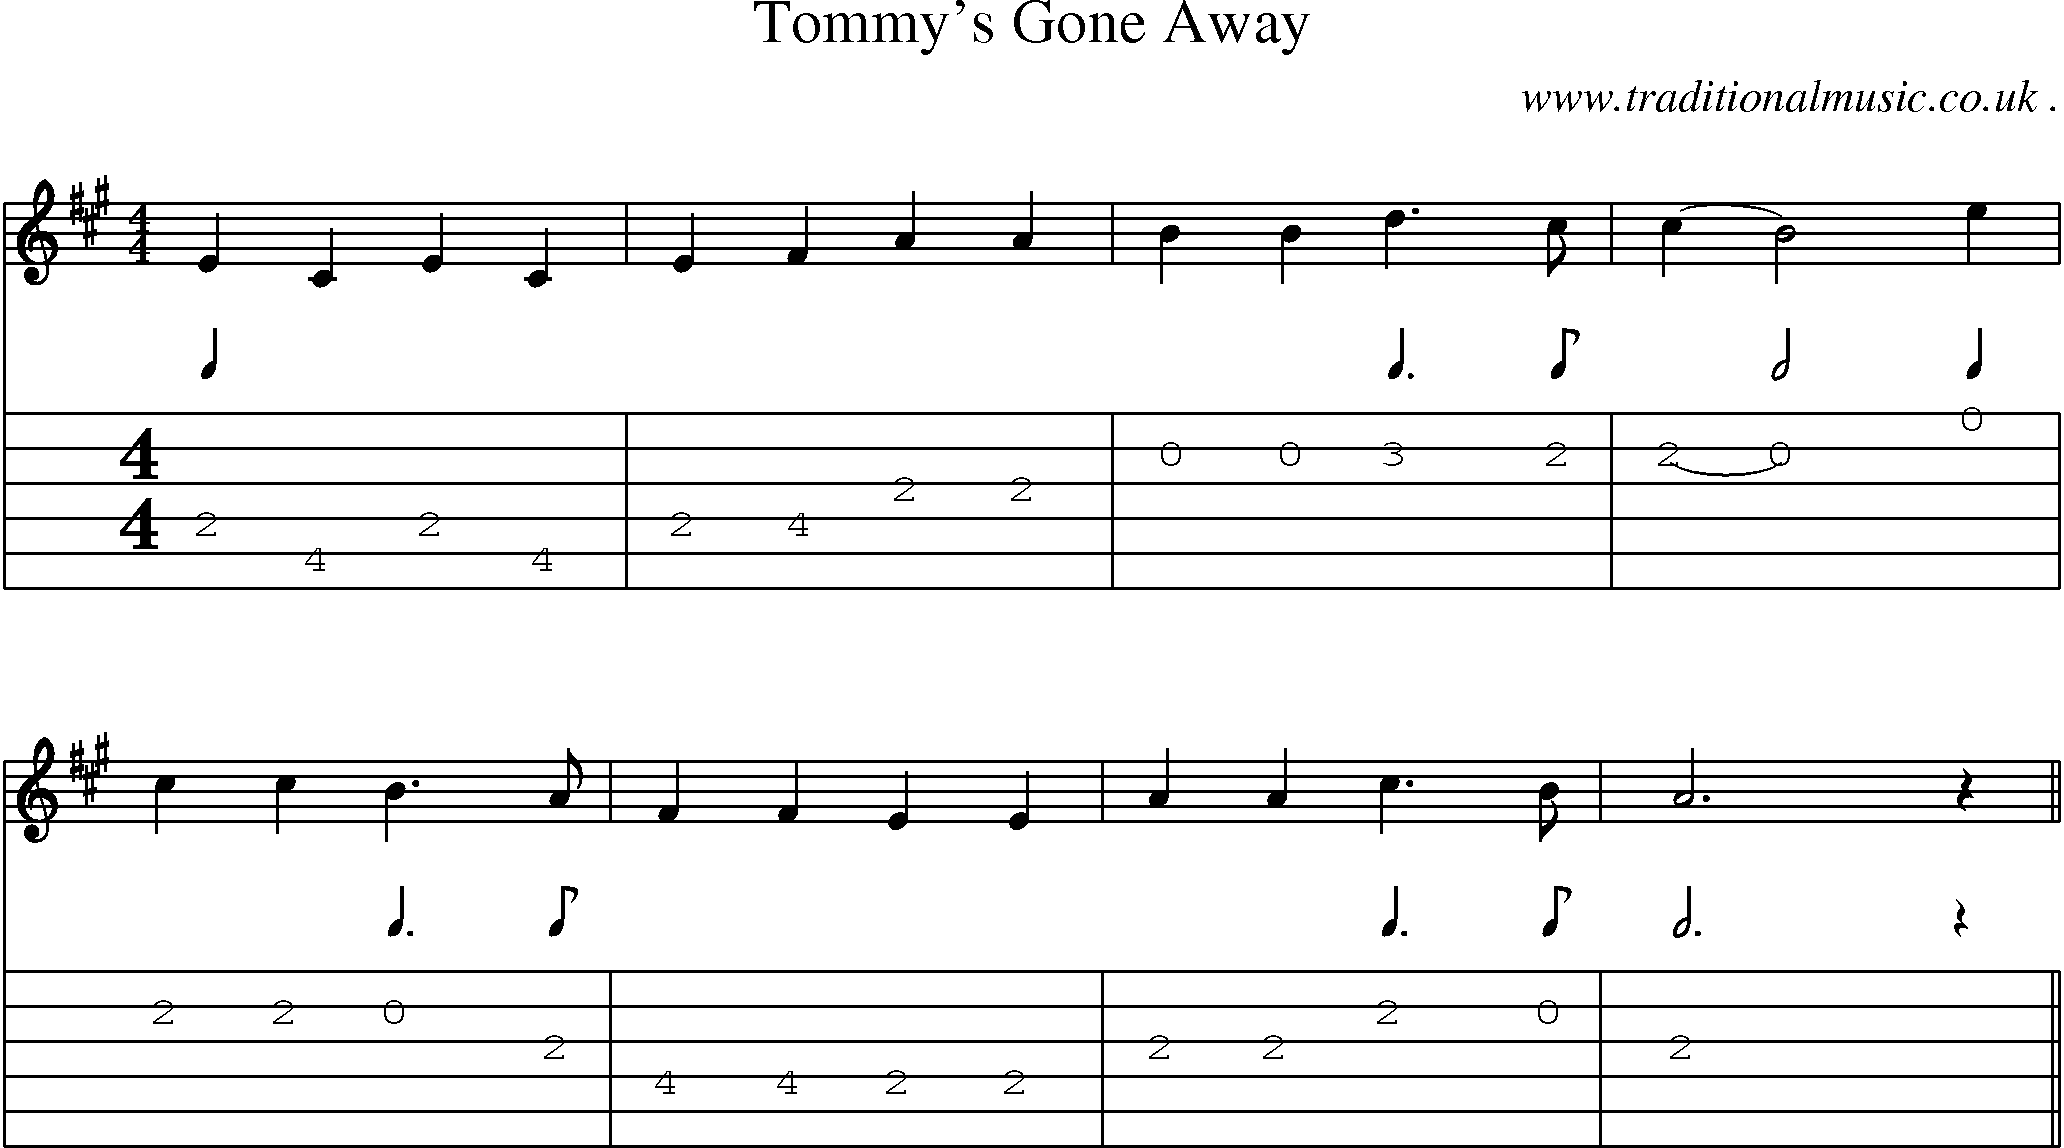 Sheet-Music and Guitar Tabs for Tommys Gone Away